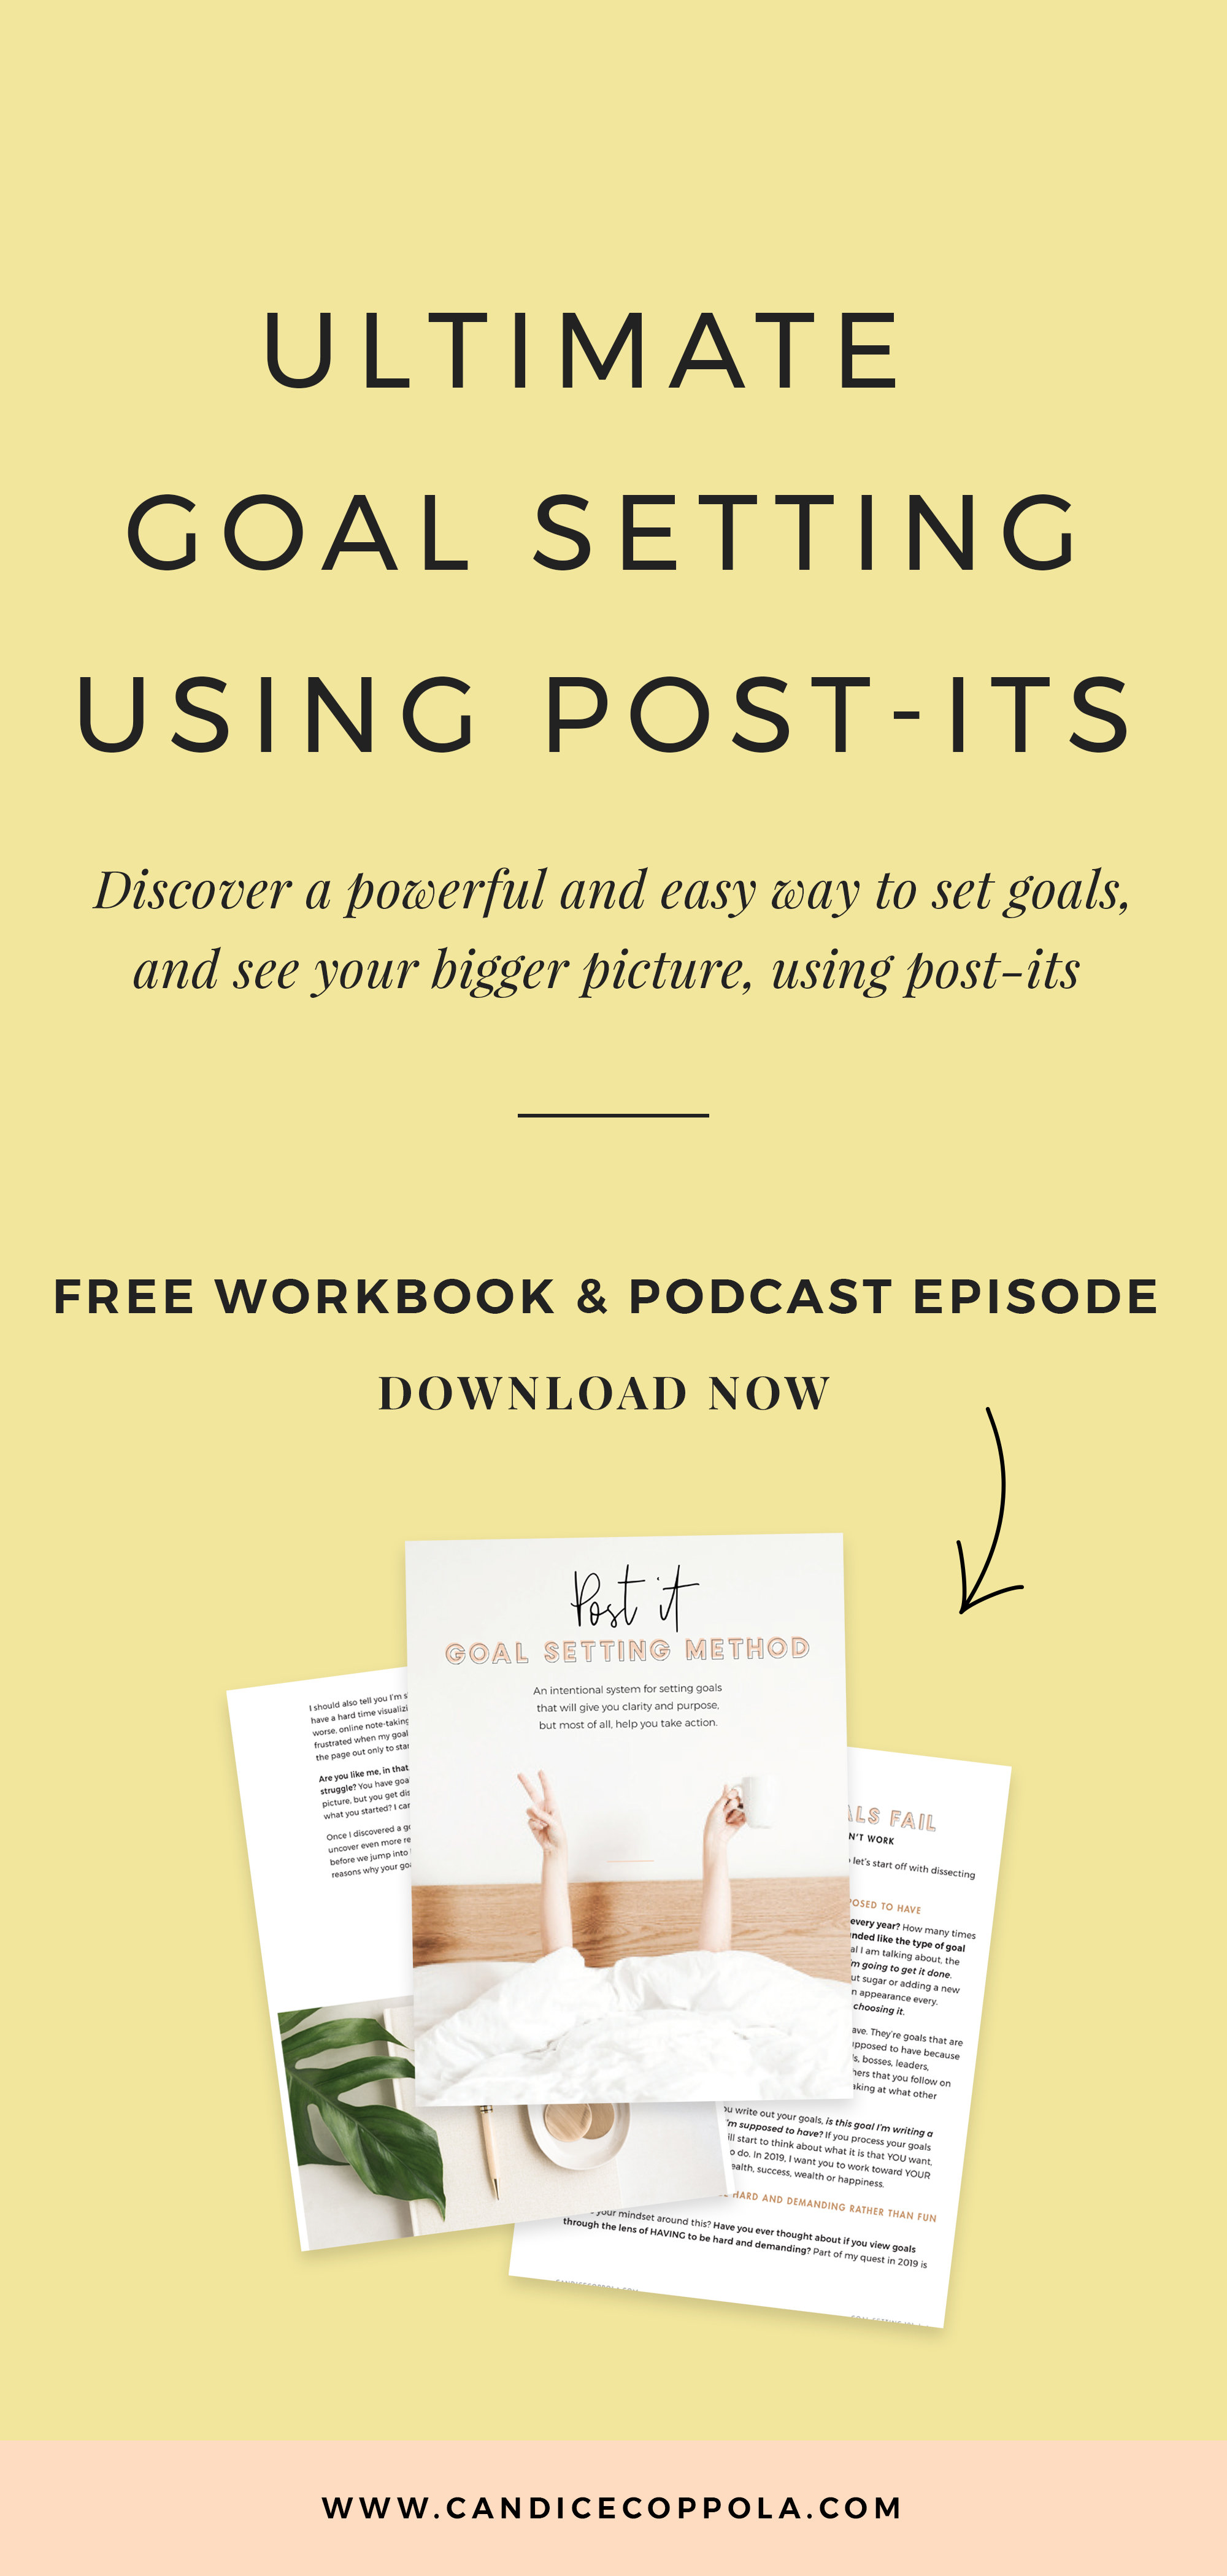 Learn my post-it goal setting method, including 2 free podcast episodes + workbook.